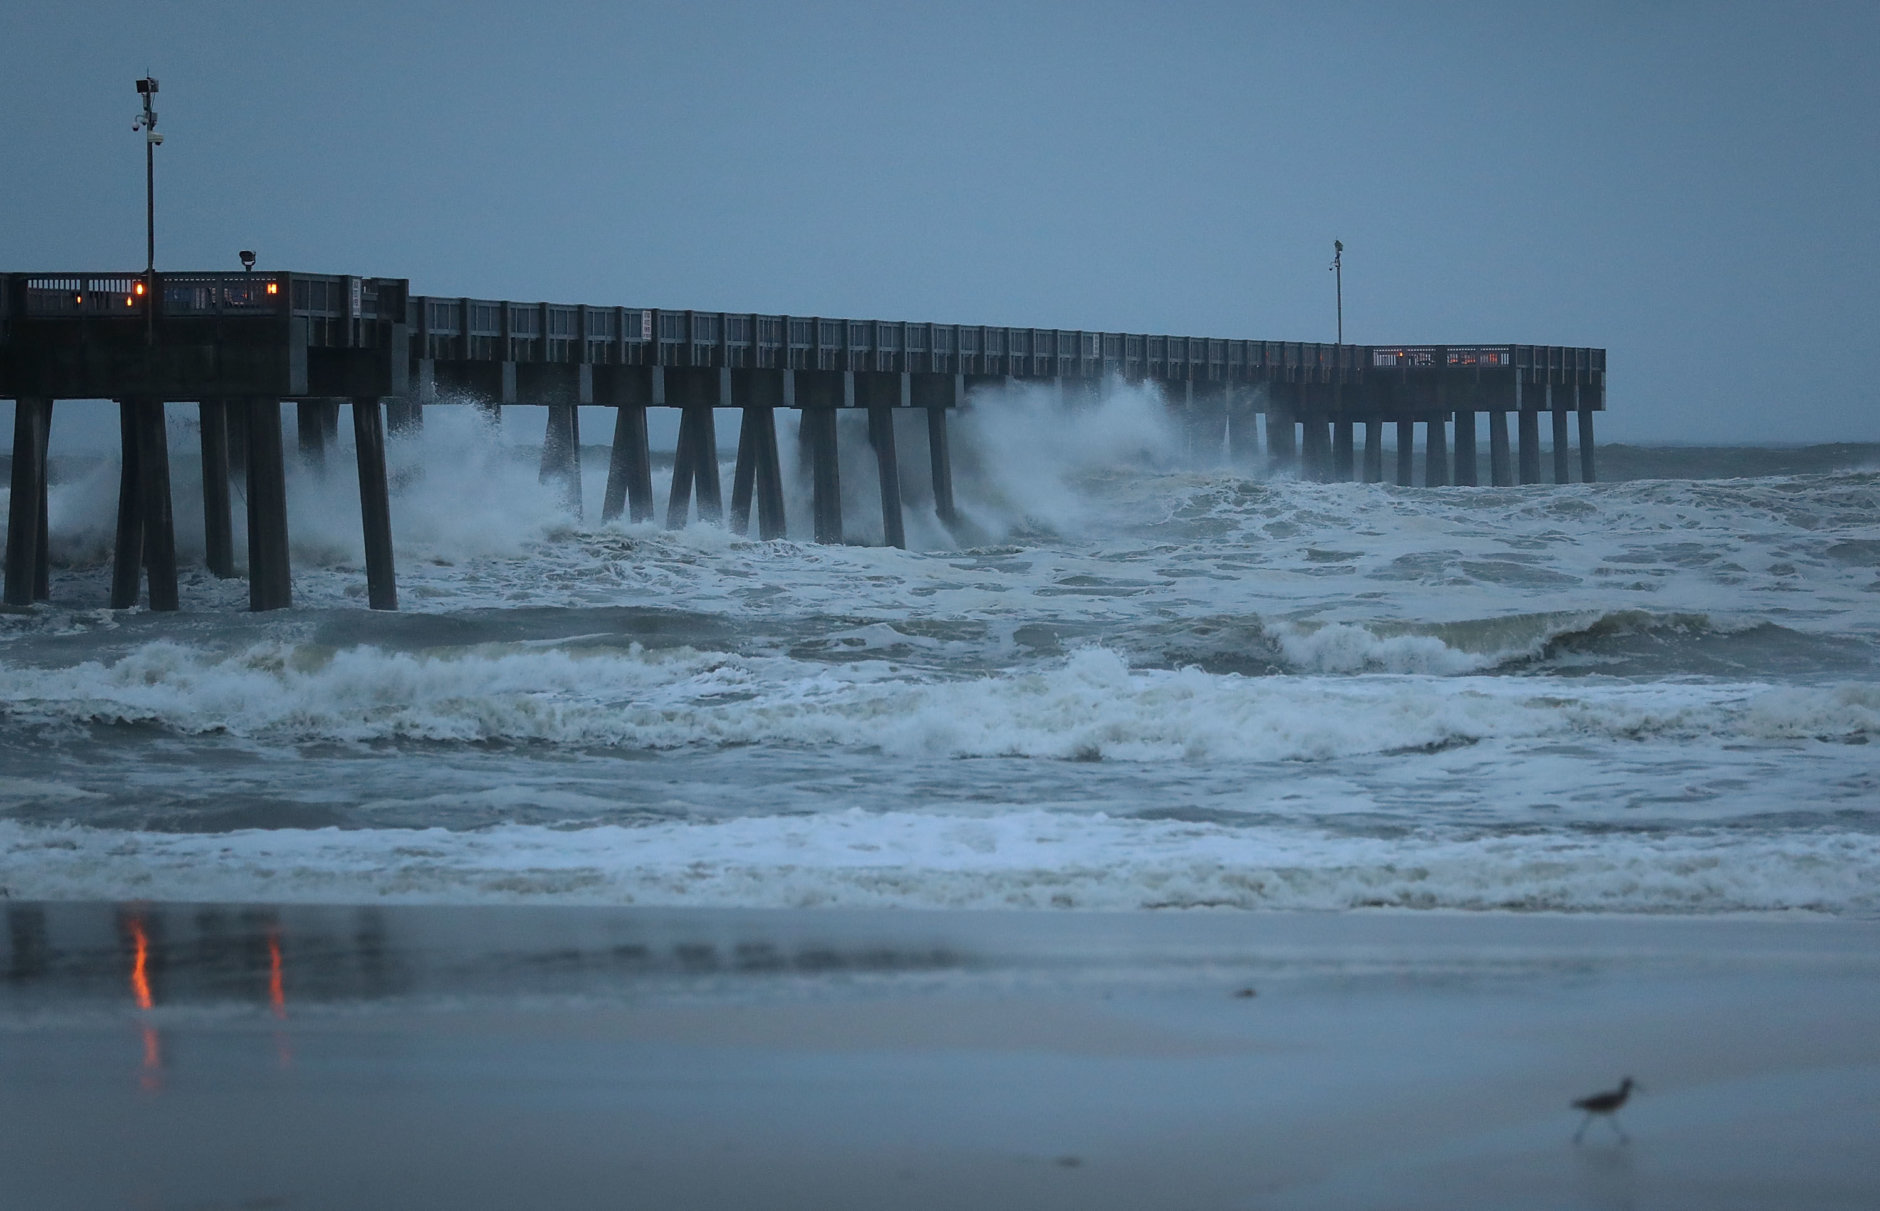 PANAMA CITY BEACH, FL - OCTOBER 10:  Waves crash along a pier as the outerbands of  hurricane Michael arrive on October 10, 2018 in Panama City Beach, Florida. The hurricane is forecast to hit the Florida Panhandle at a possible category 4 storm.  (Photo by Joe Raedle/Getty Images)